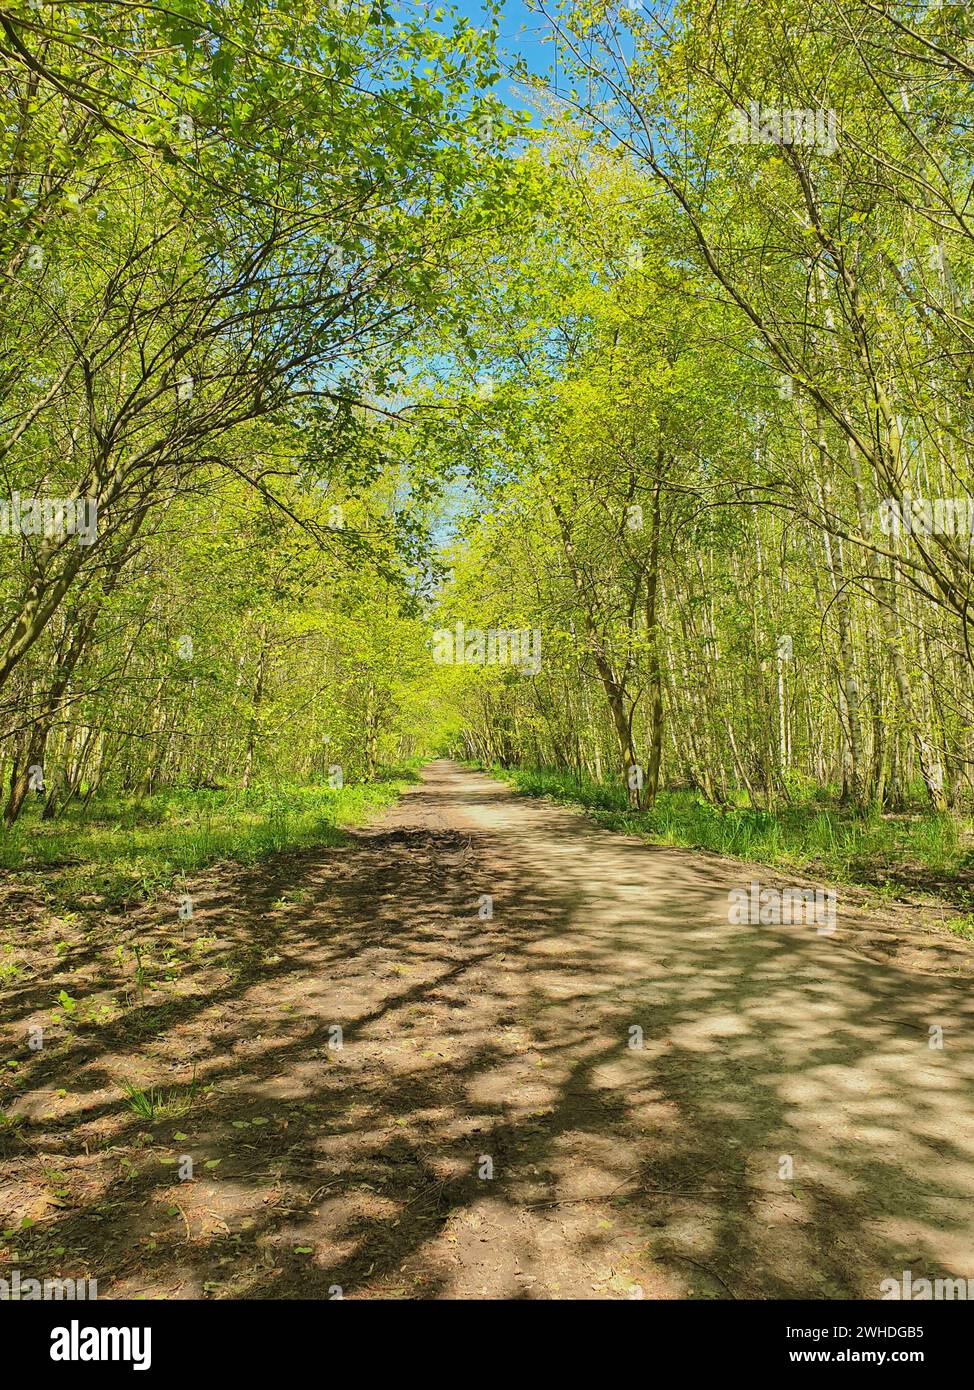 Path through the spring-like forest with green leaves and trees in the sunlight against a blue sky Stock Photo